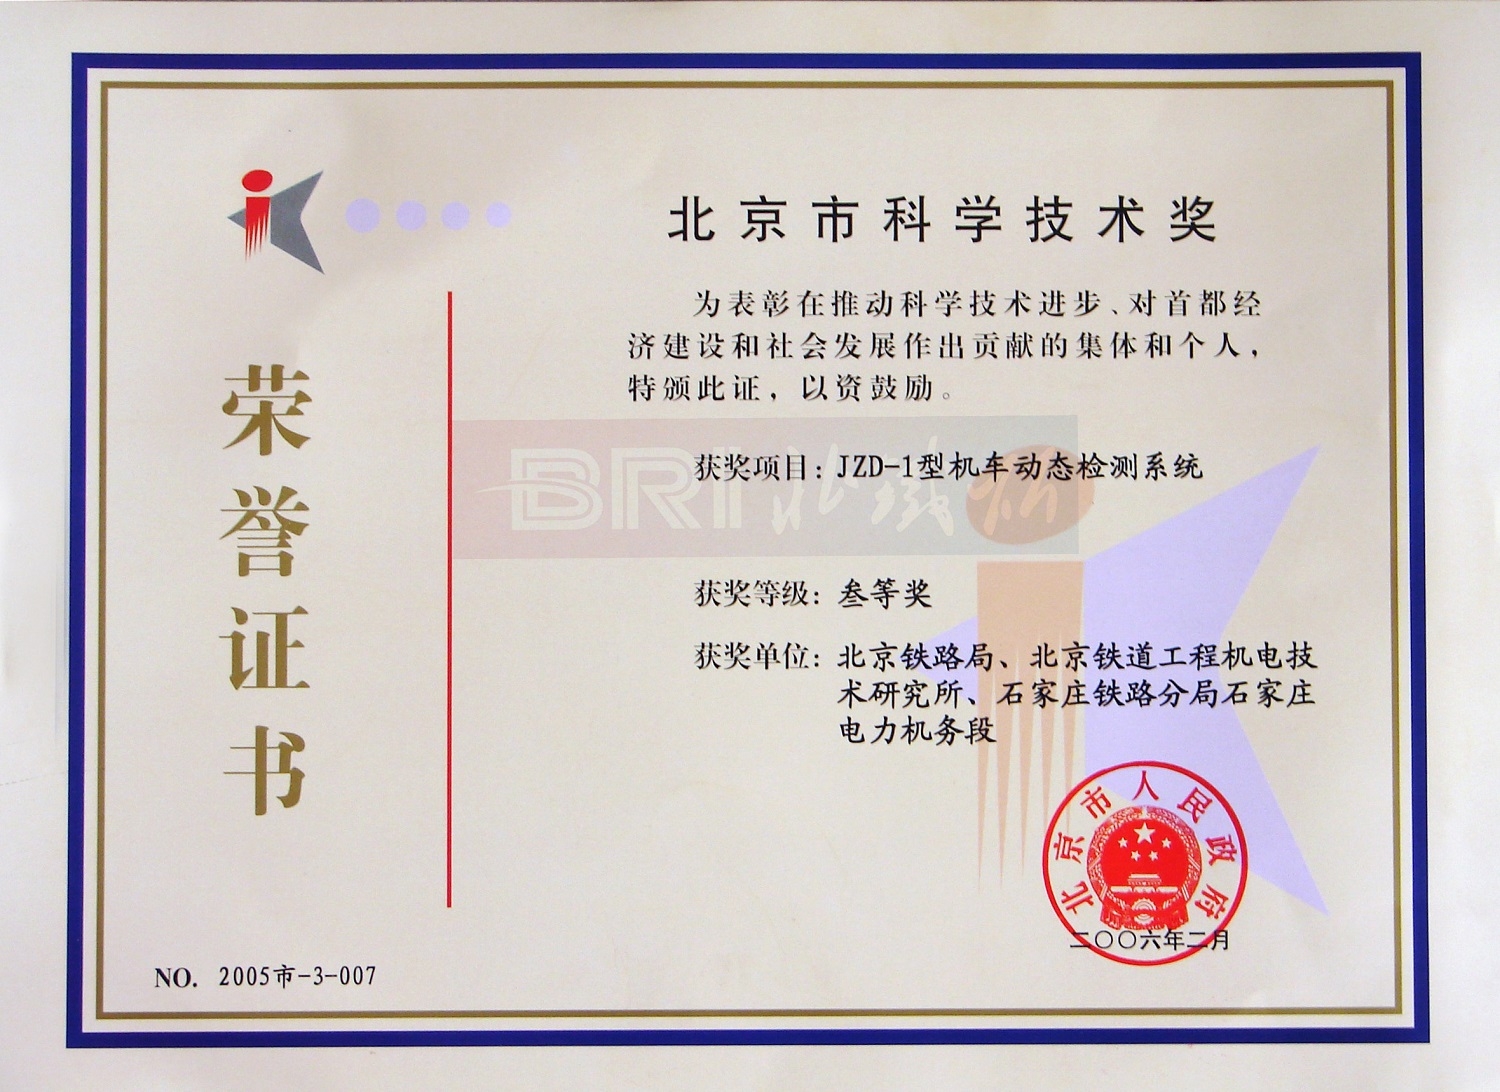 The third prize of Science and Technology in Beijing